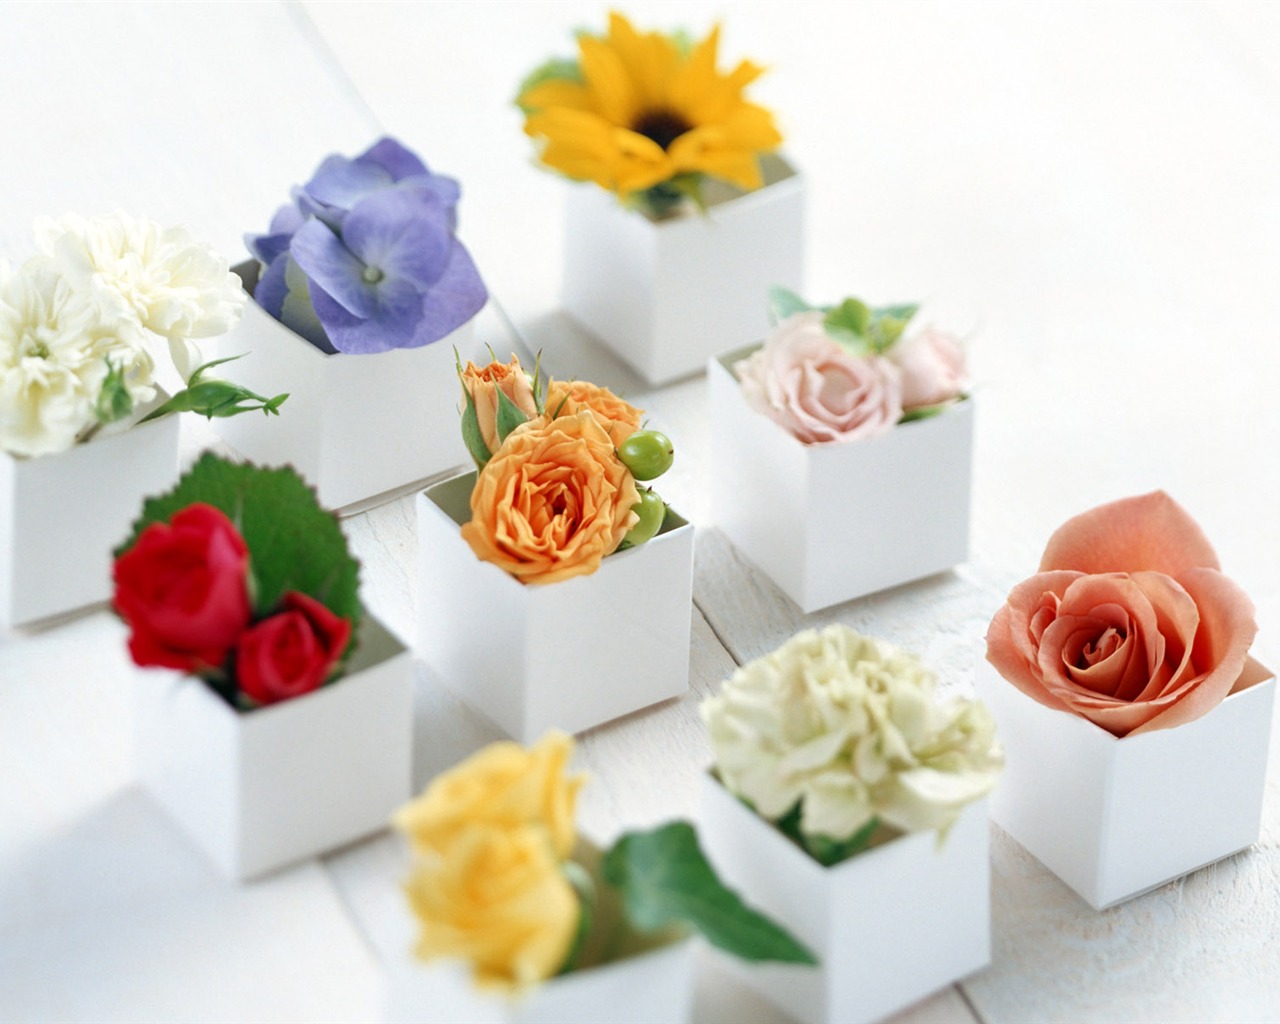 Flowers and gifts wallpaper (1) #2 - 1280x1024